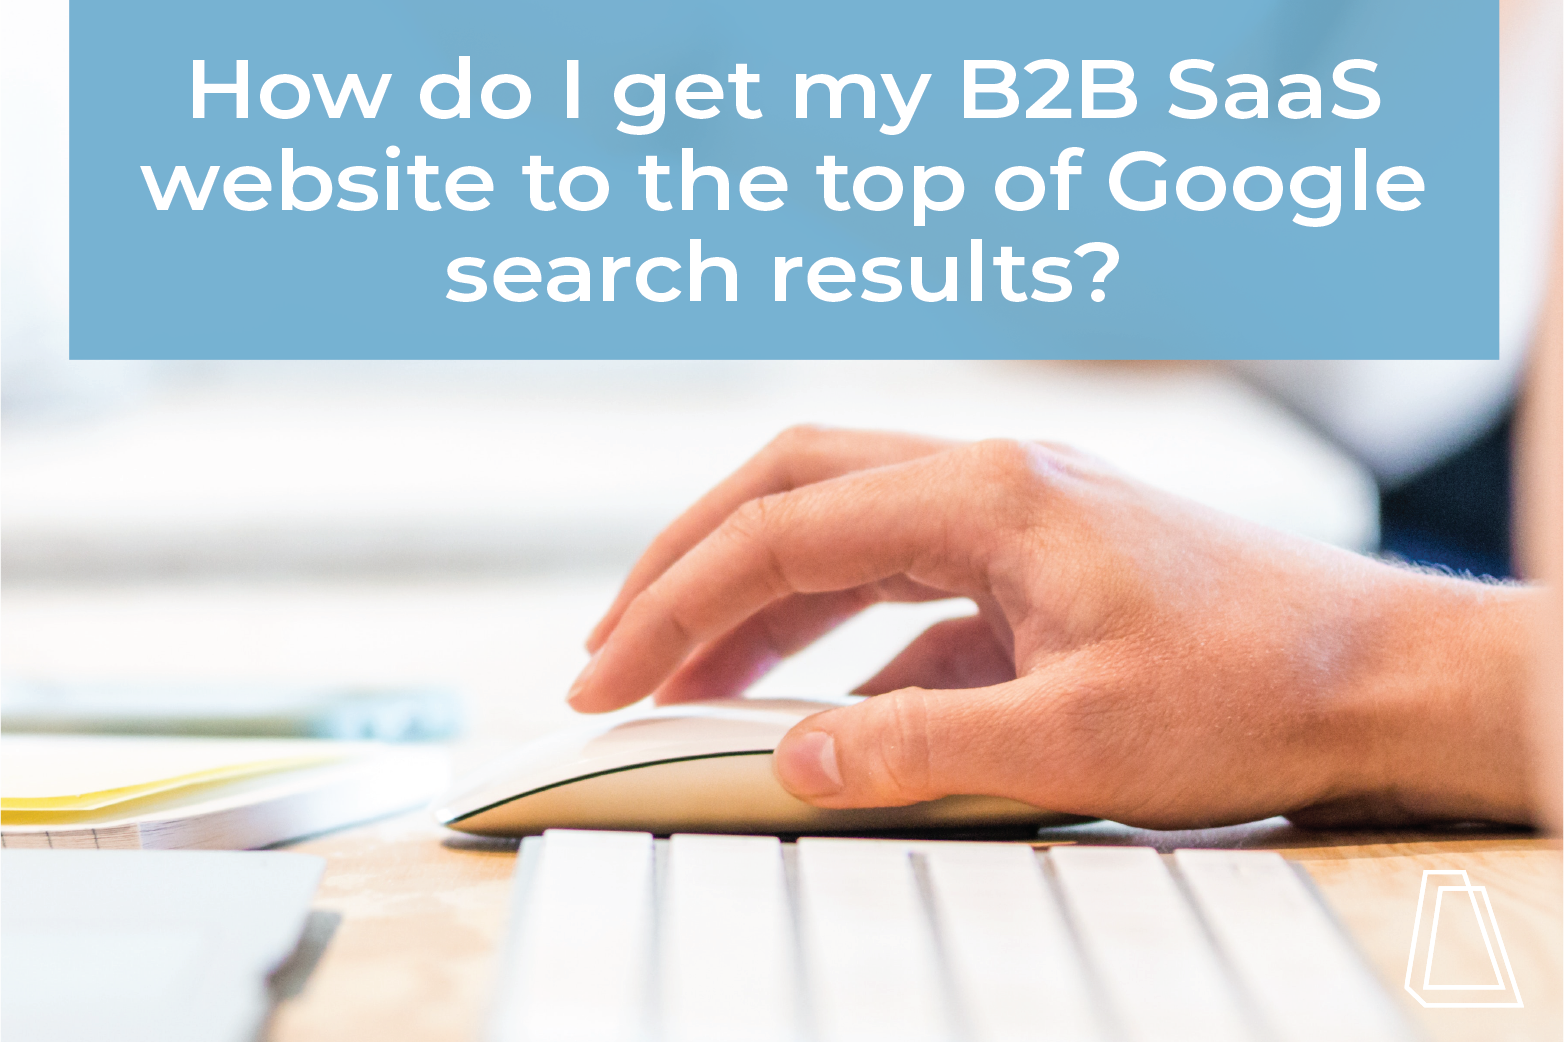 How do I get my B2B SaaS website to the top of Google search results?